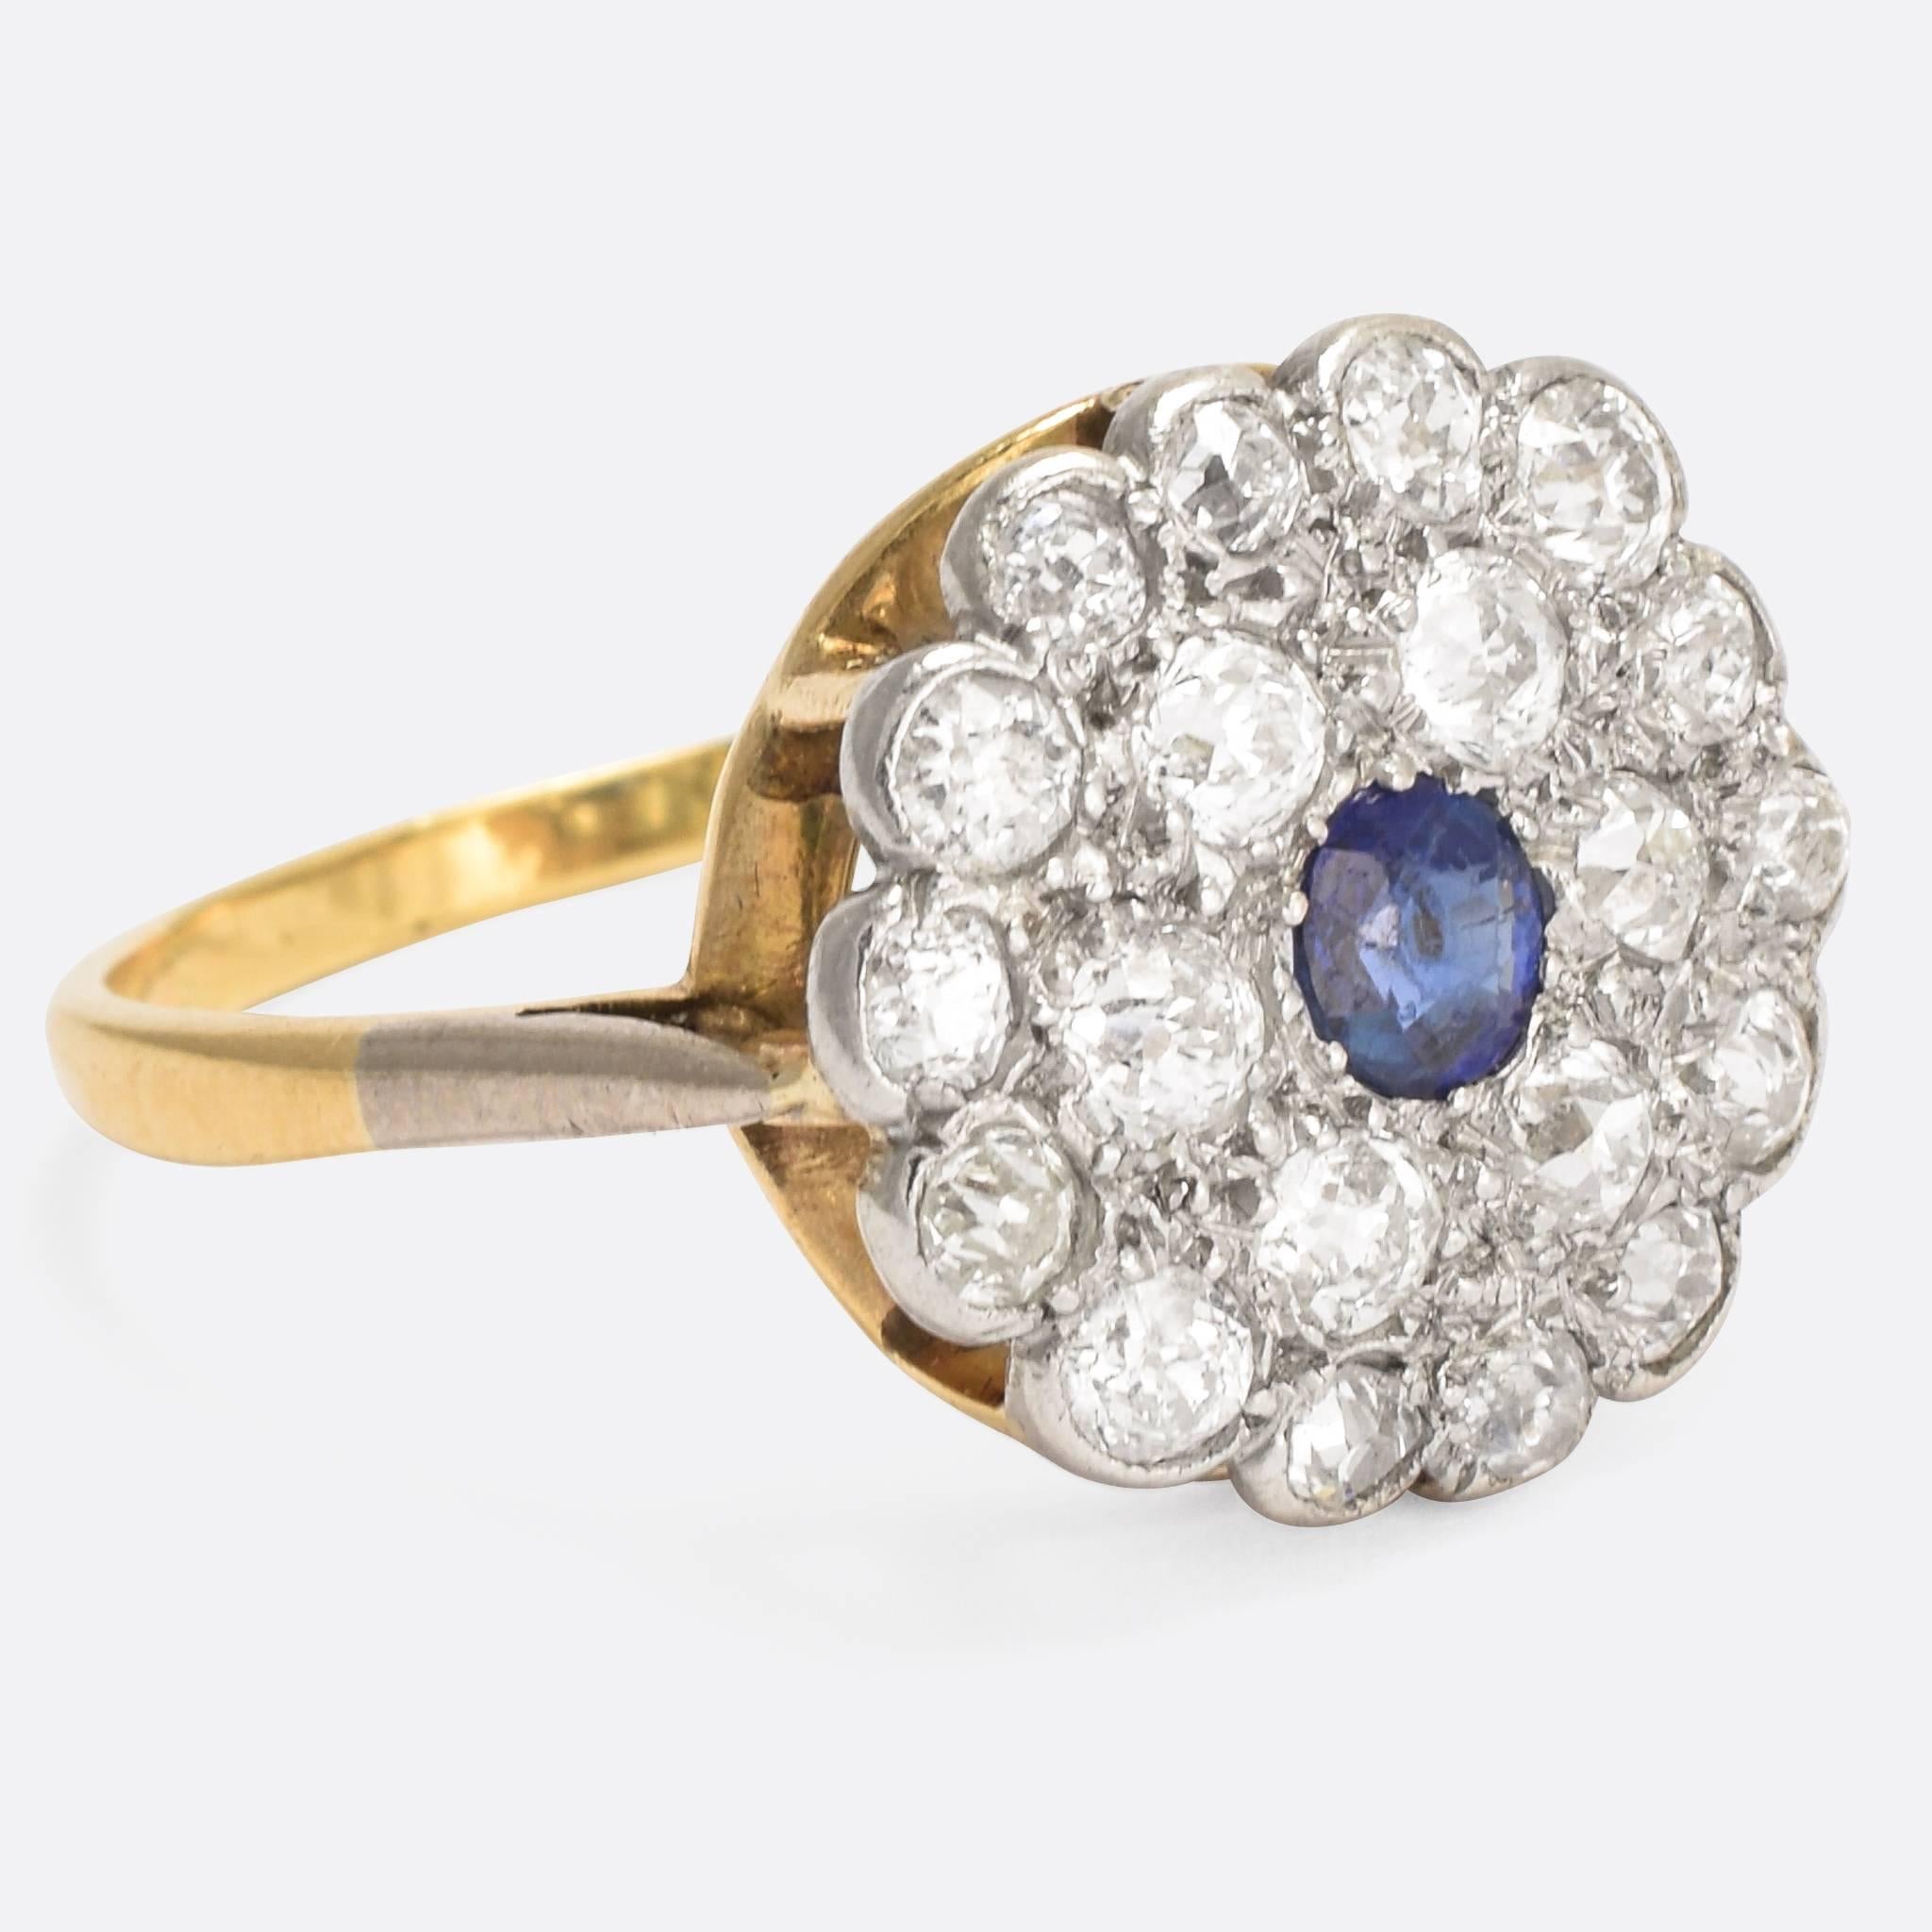 A beautiful Art Deco flower ring set with a central blue Sapphire surrounded by a double halo of old cut diamonds. It's modelled in 18k gold, with the stones mounted in platinum, which continues down the shoulders to create a stylish two-tone